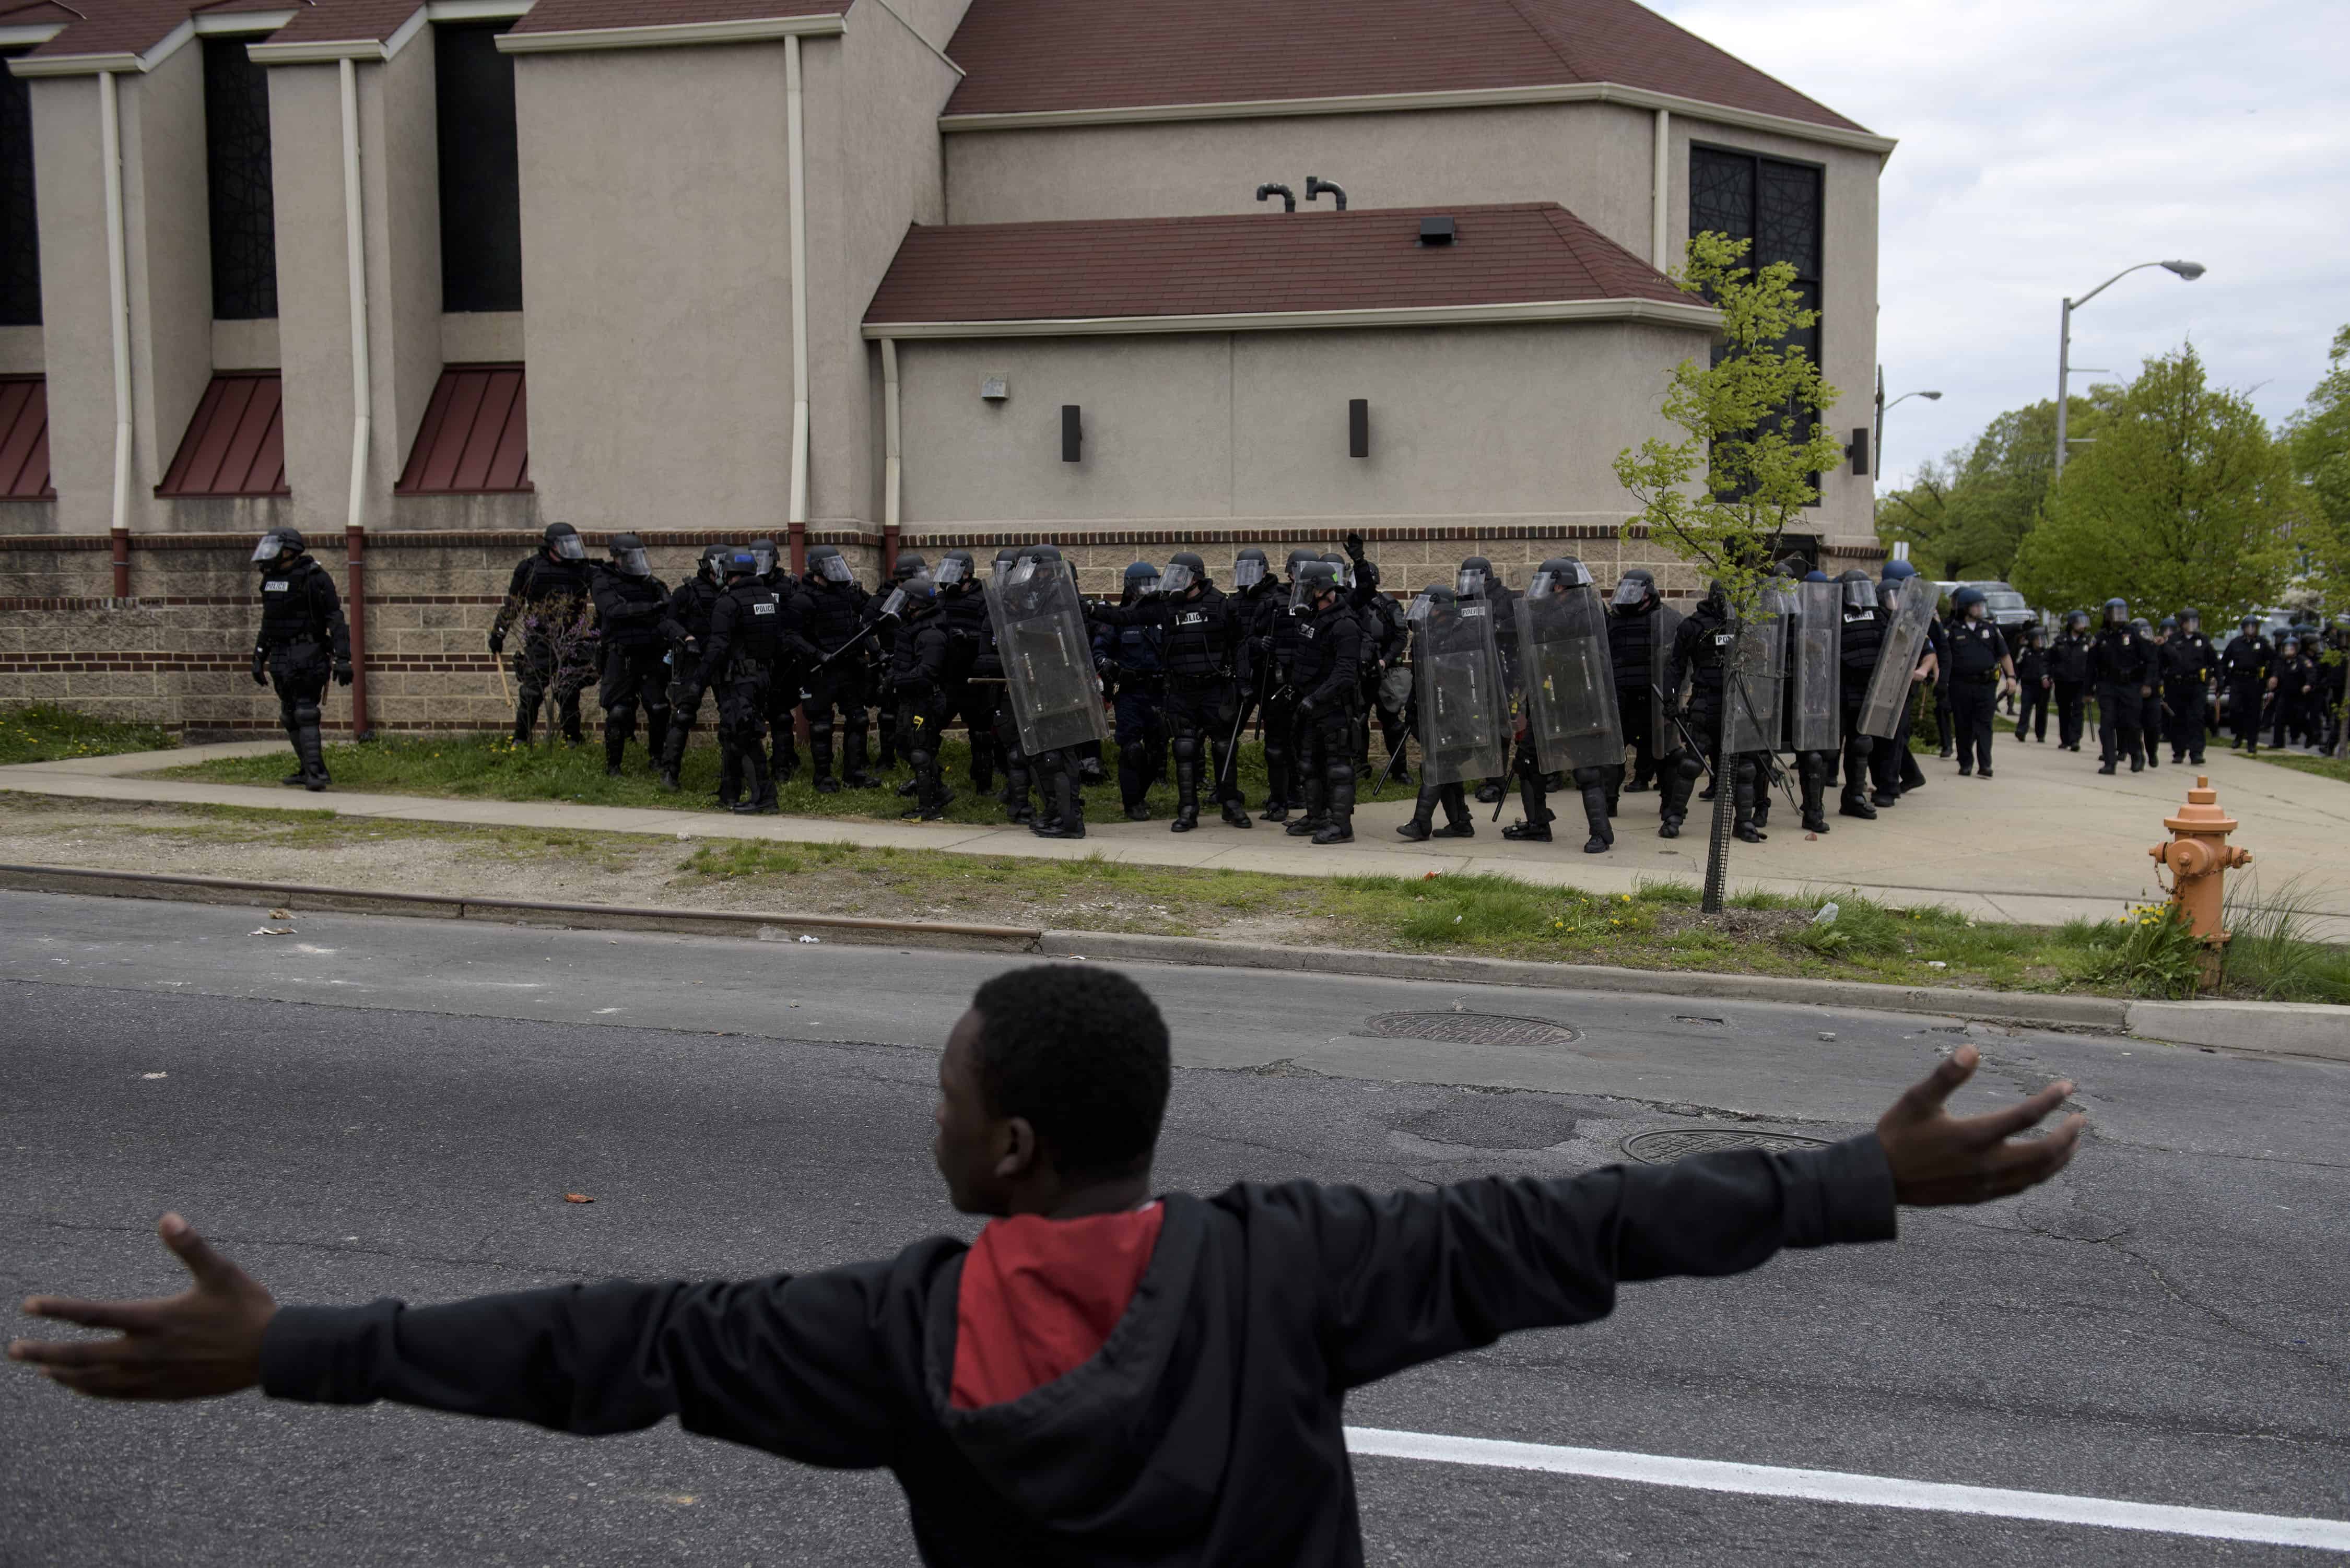 A protester gestures before riot police on April 27, 2015 in Baltimore, Maryland.